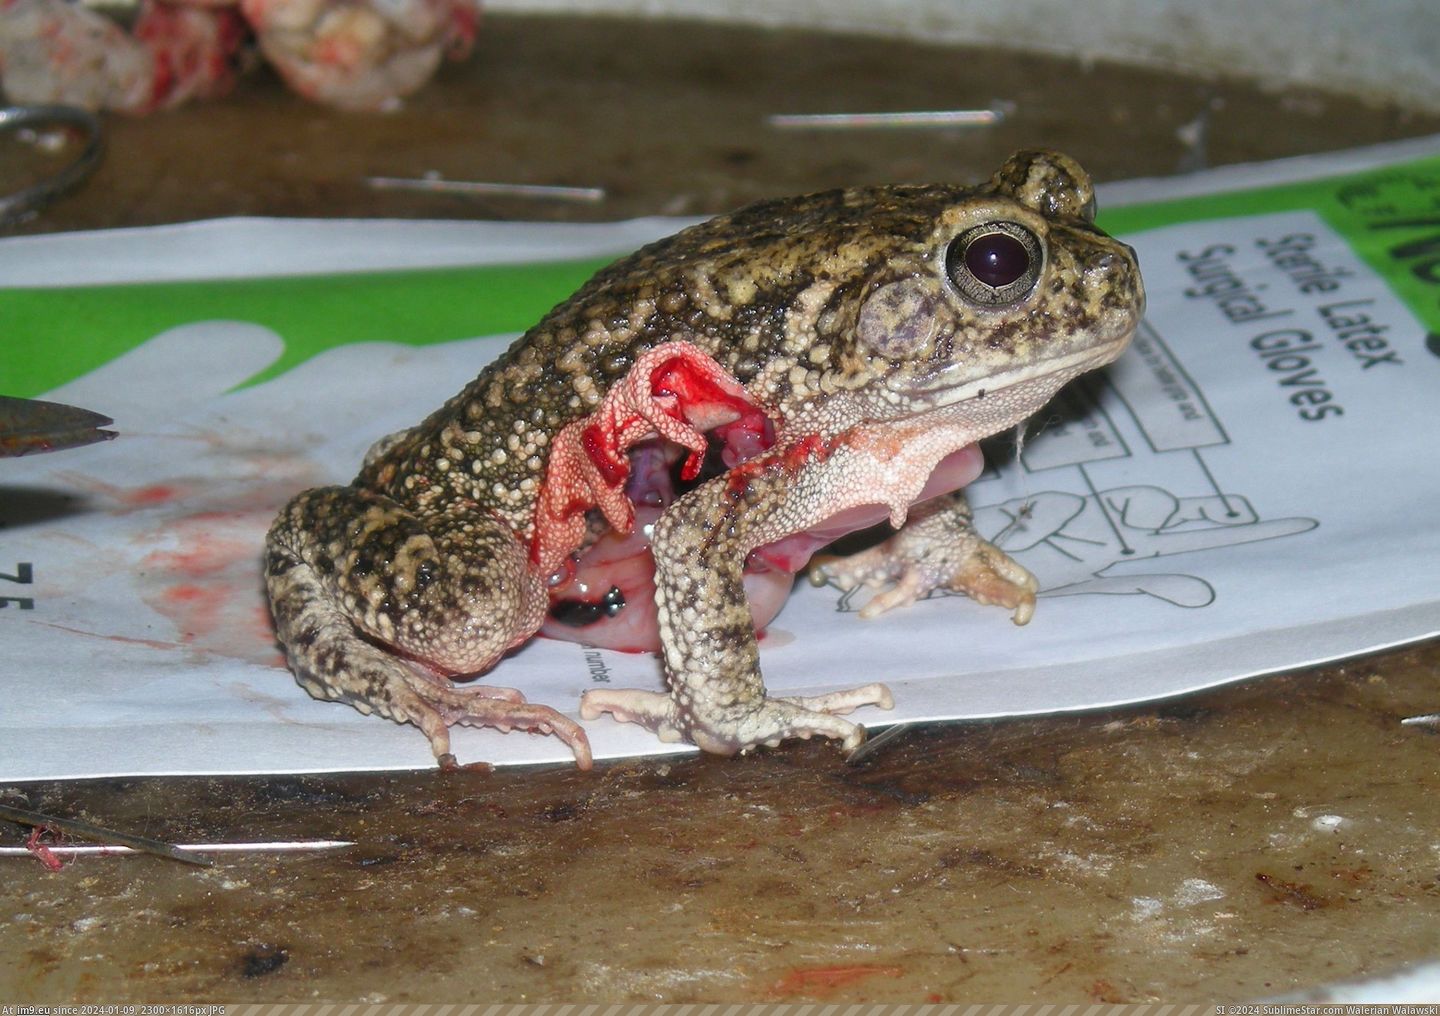 #Wtf #Sleep #Frog #Chloroform #Vivisected #Wikipedia #Induced #Wakes [Wtf] A frog being vivisected wakes up from a chloroform-induced 'sleep.' [From Wikipedia.] Pic. (Image of album My r/WTF favs))